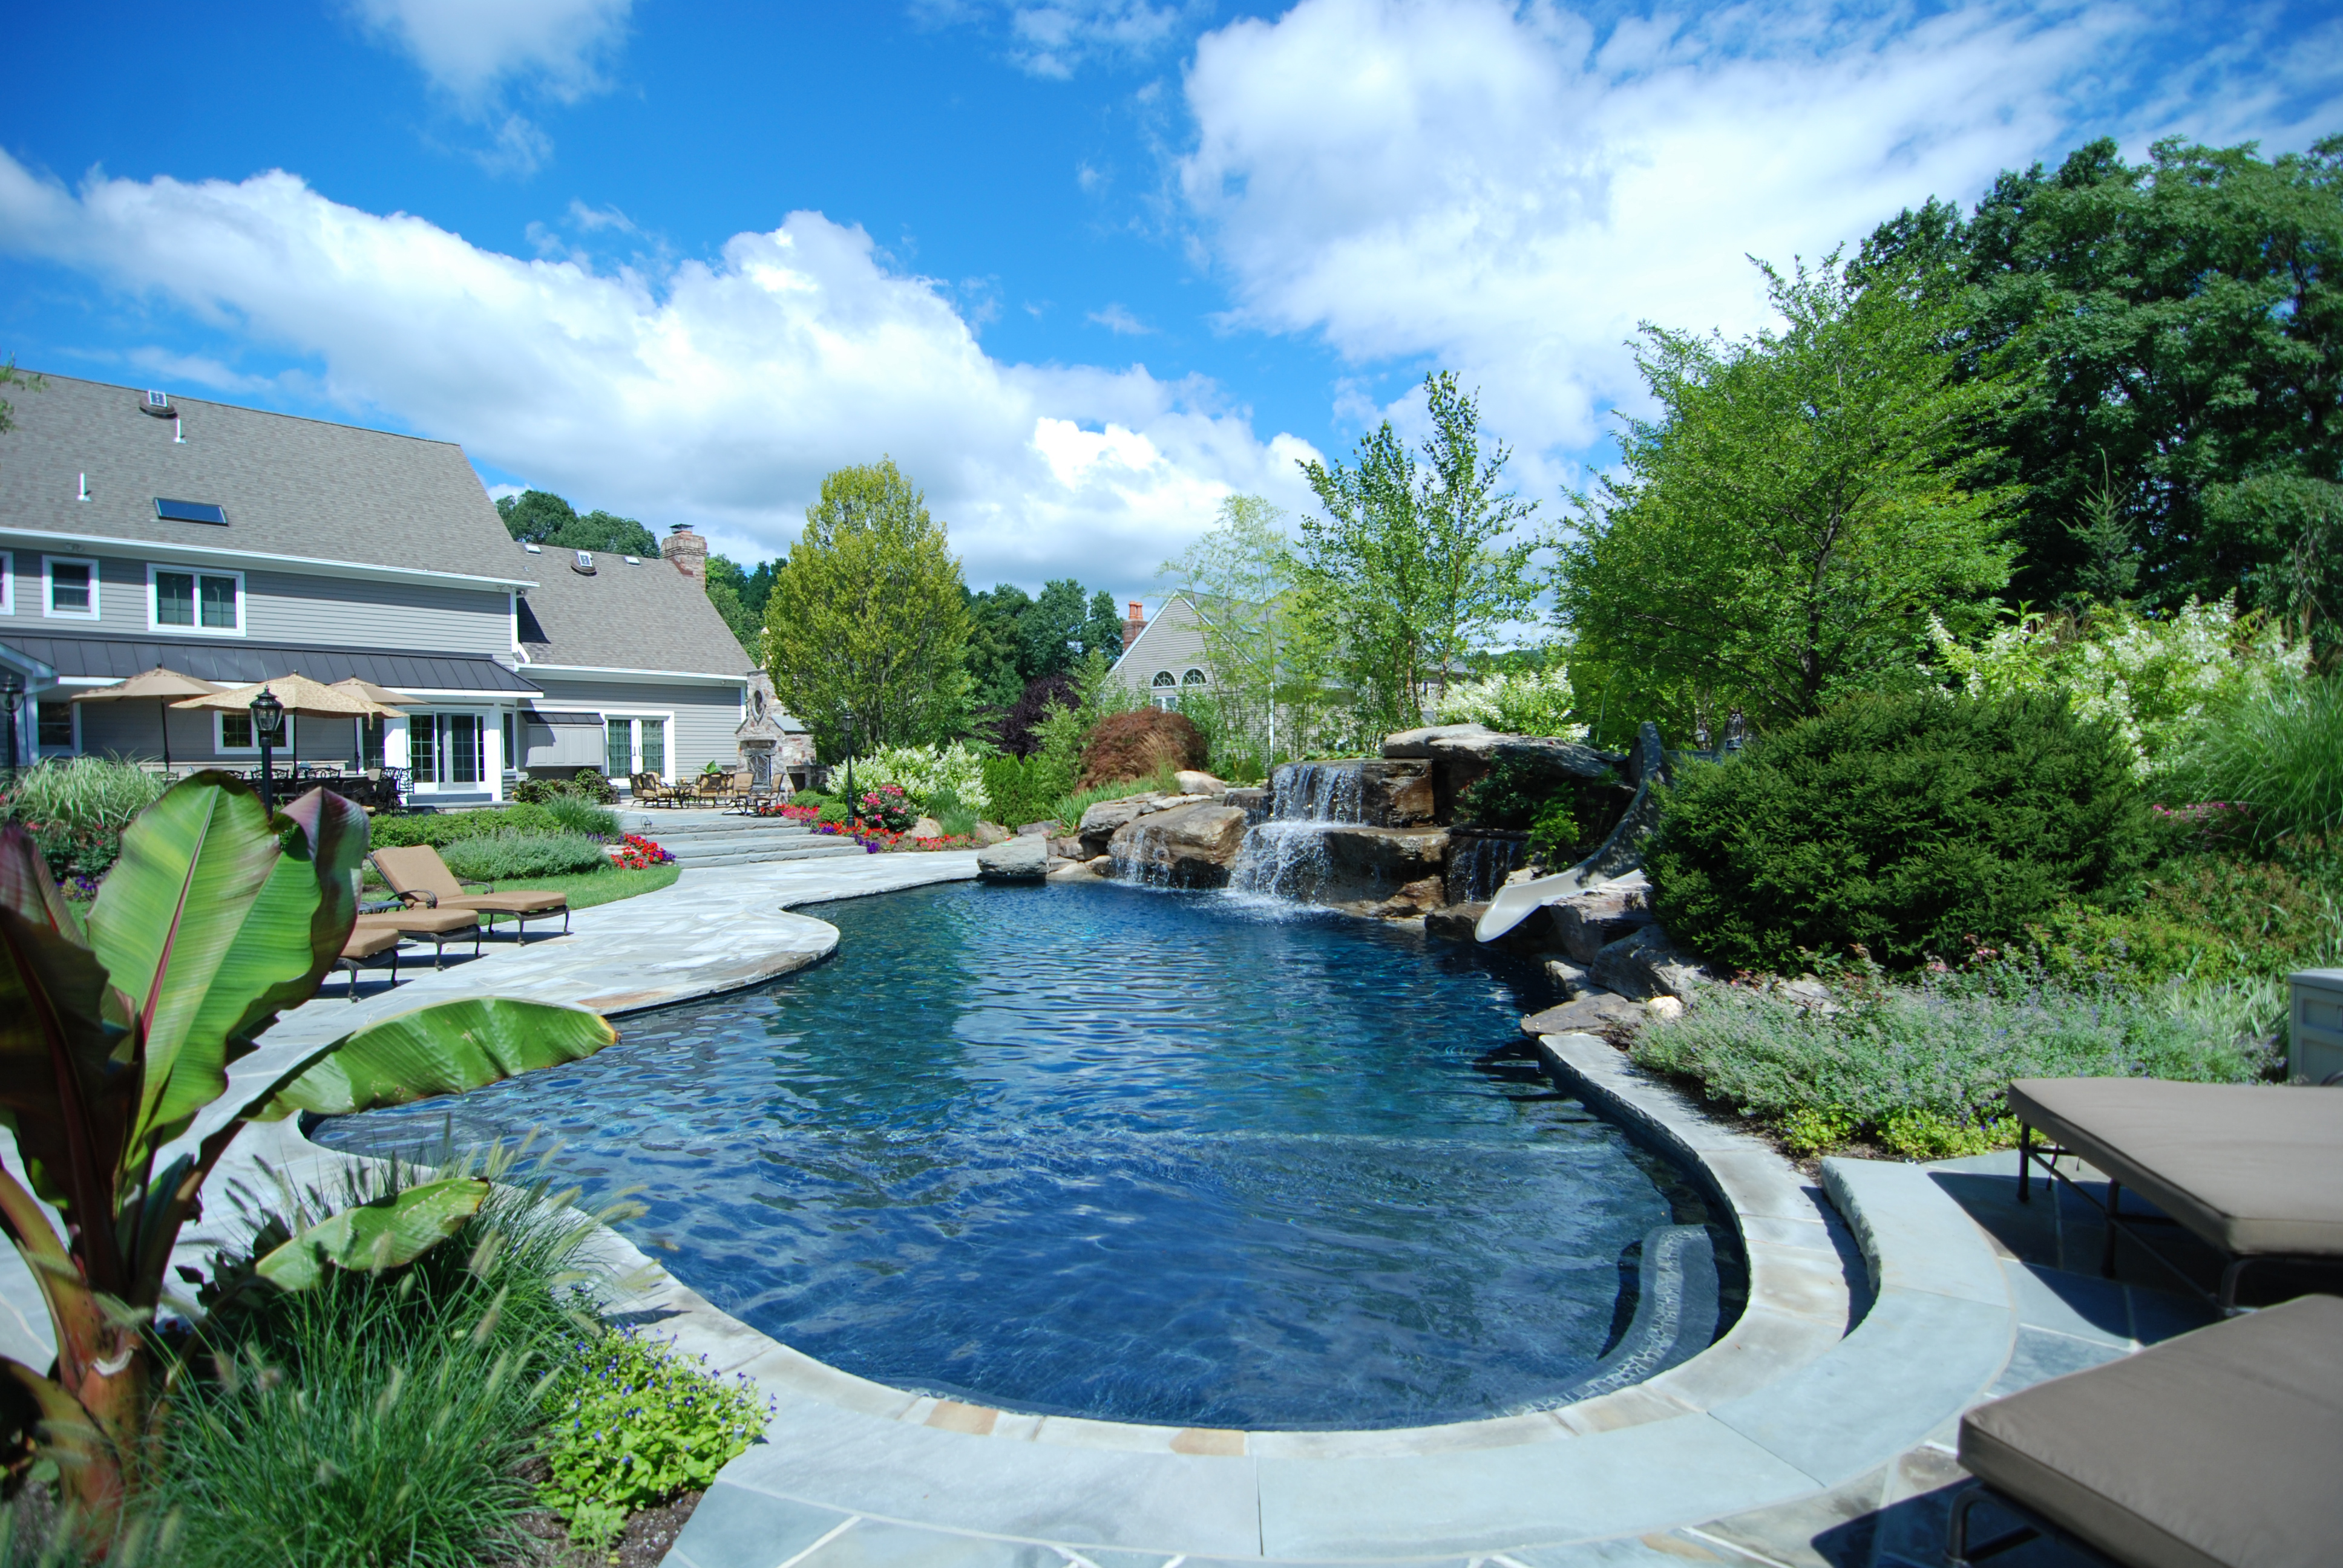 New jersey pool builder wins four awards of excellence for for Pool design garden